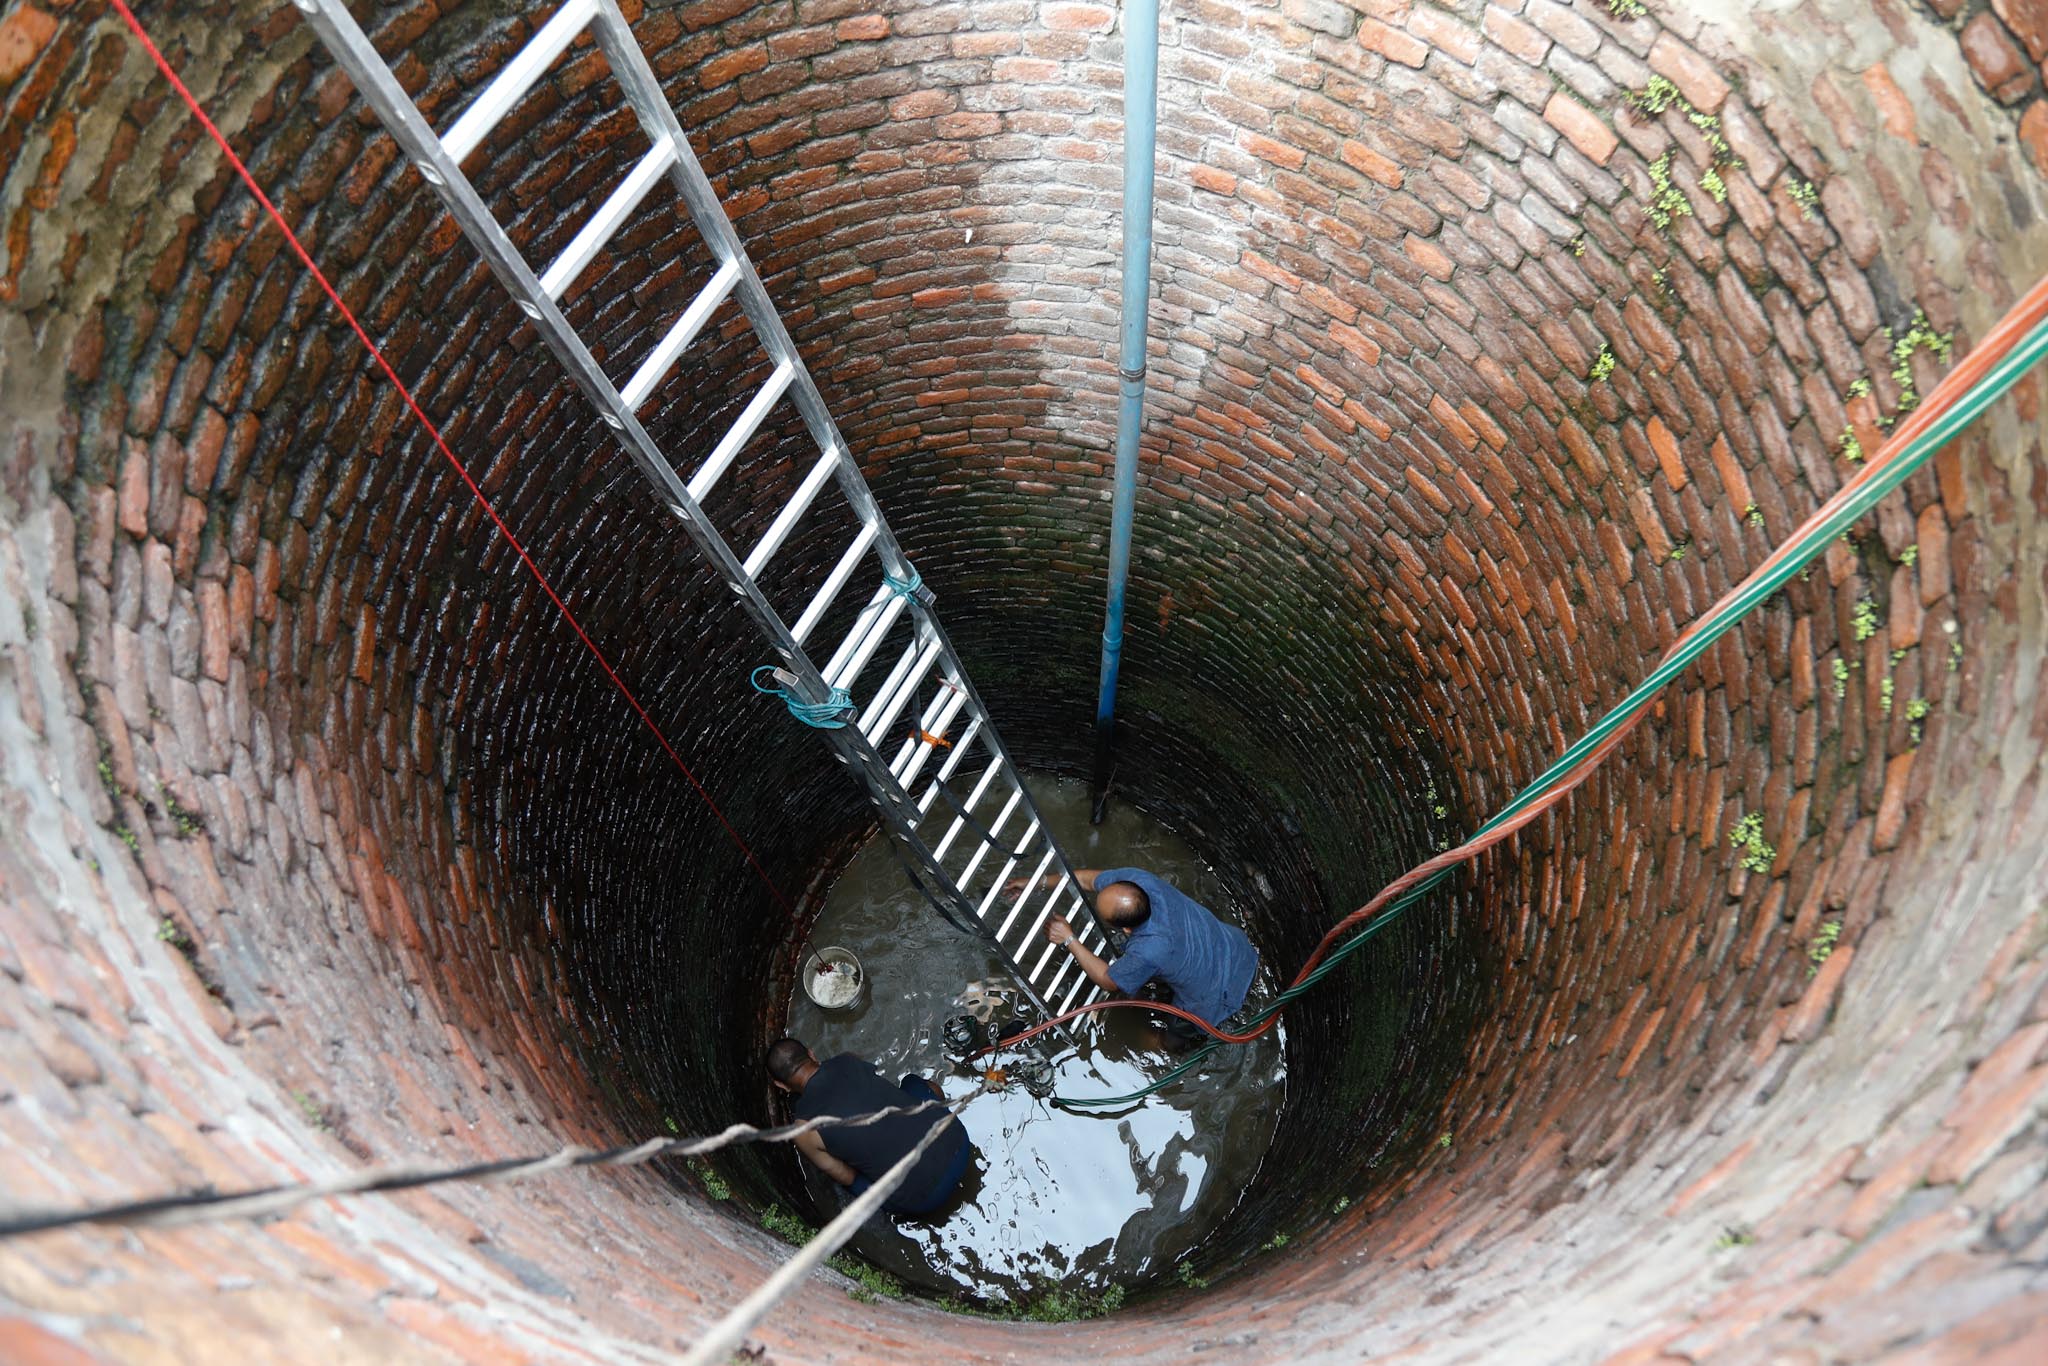 Women fell into the well of Imadol rescued